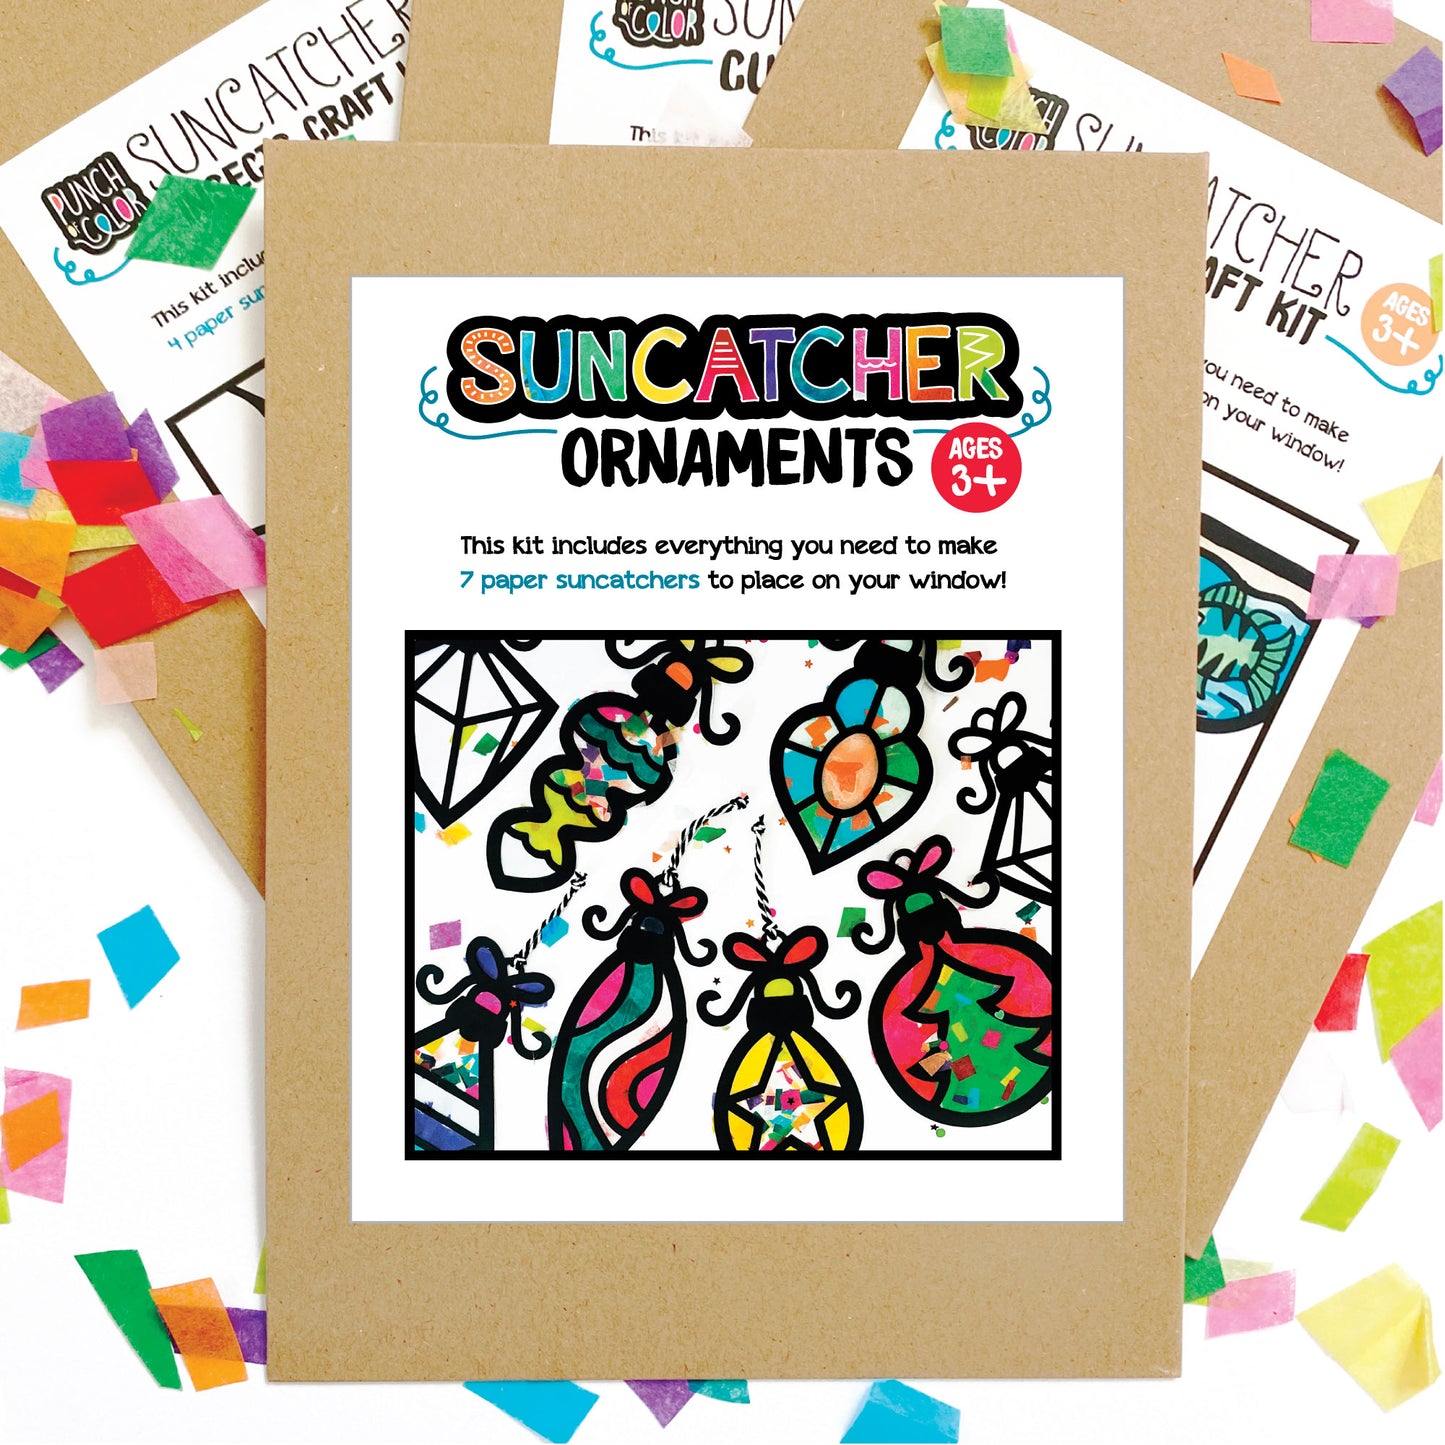 Paper ornament suncatcher arts and crafts kit for preschool party